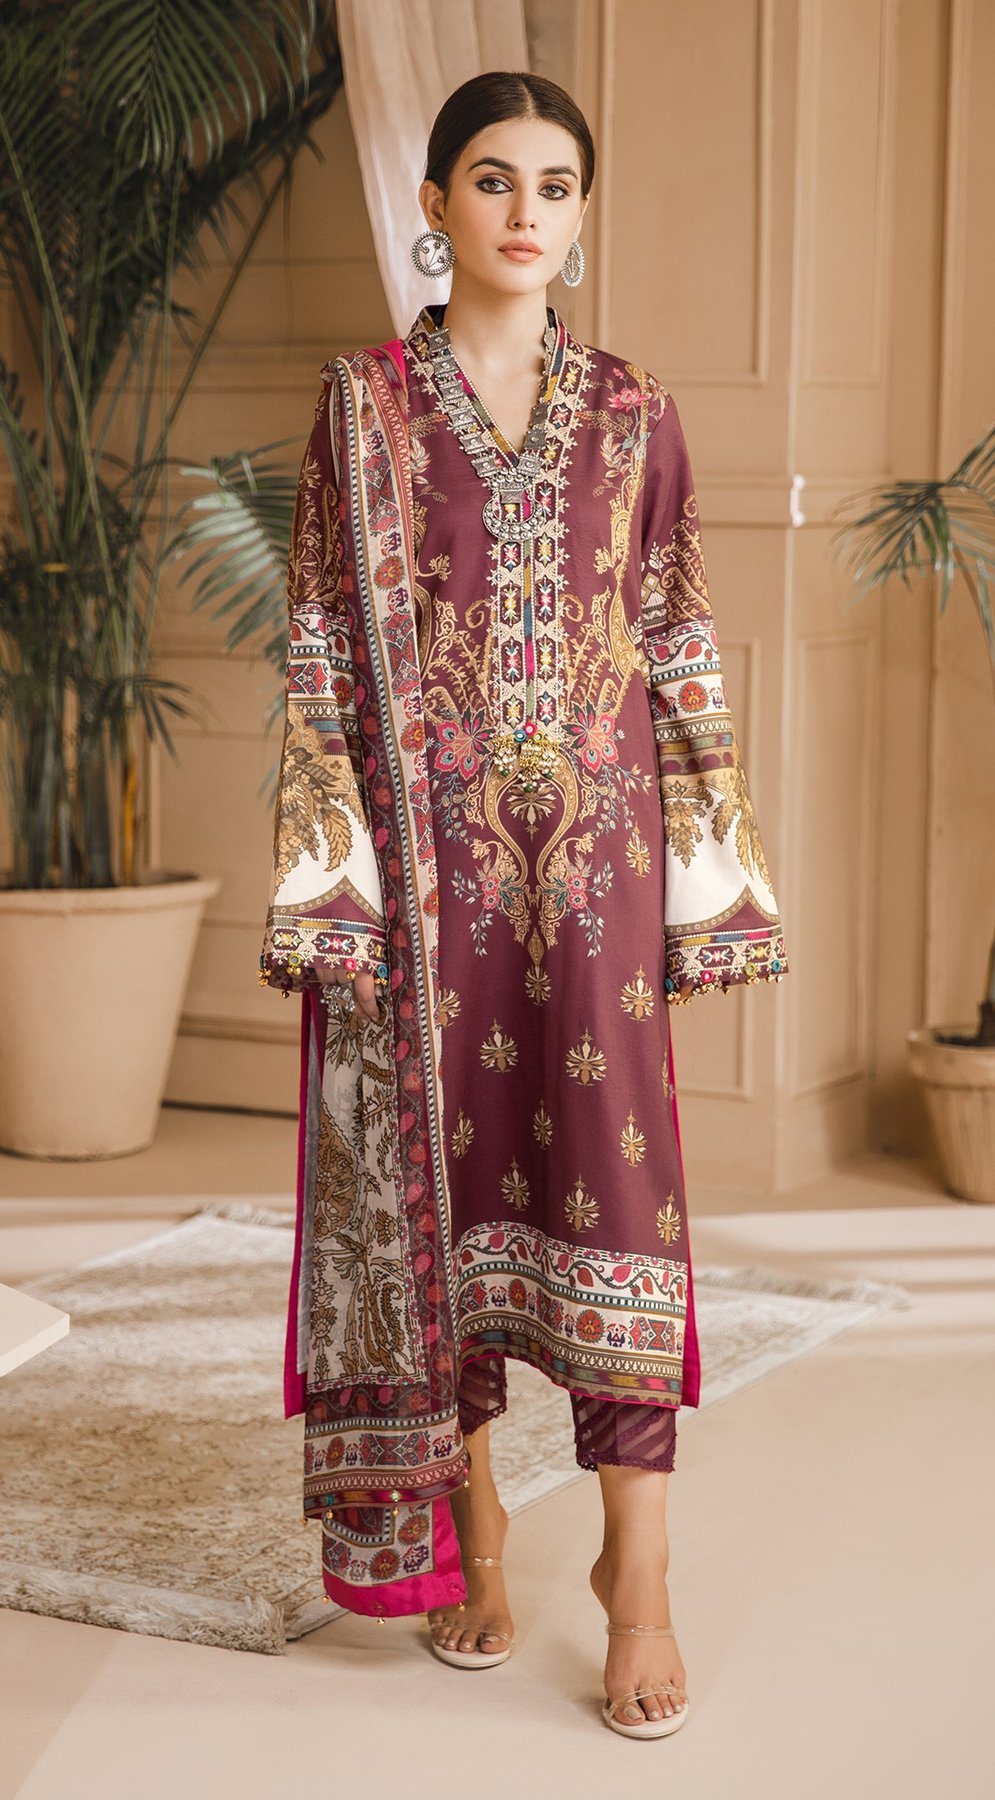 Amaya | Anaya by Kiran Chaudhry | Noor Bano | Unstitched Embroidered Cambric Collection'21